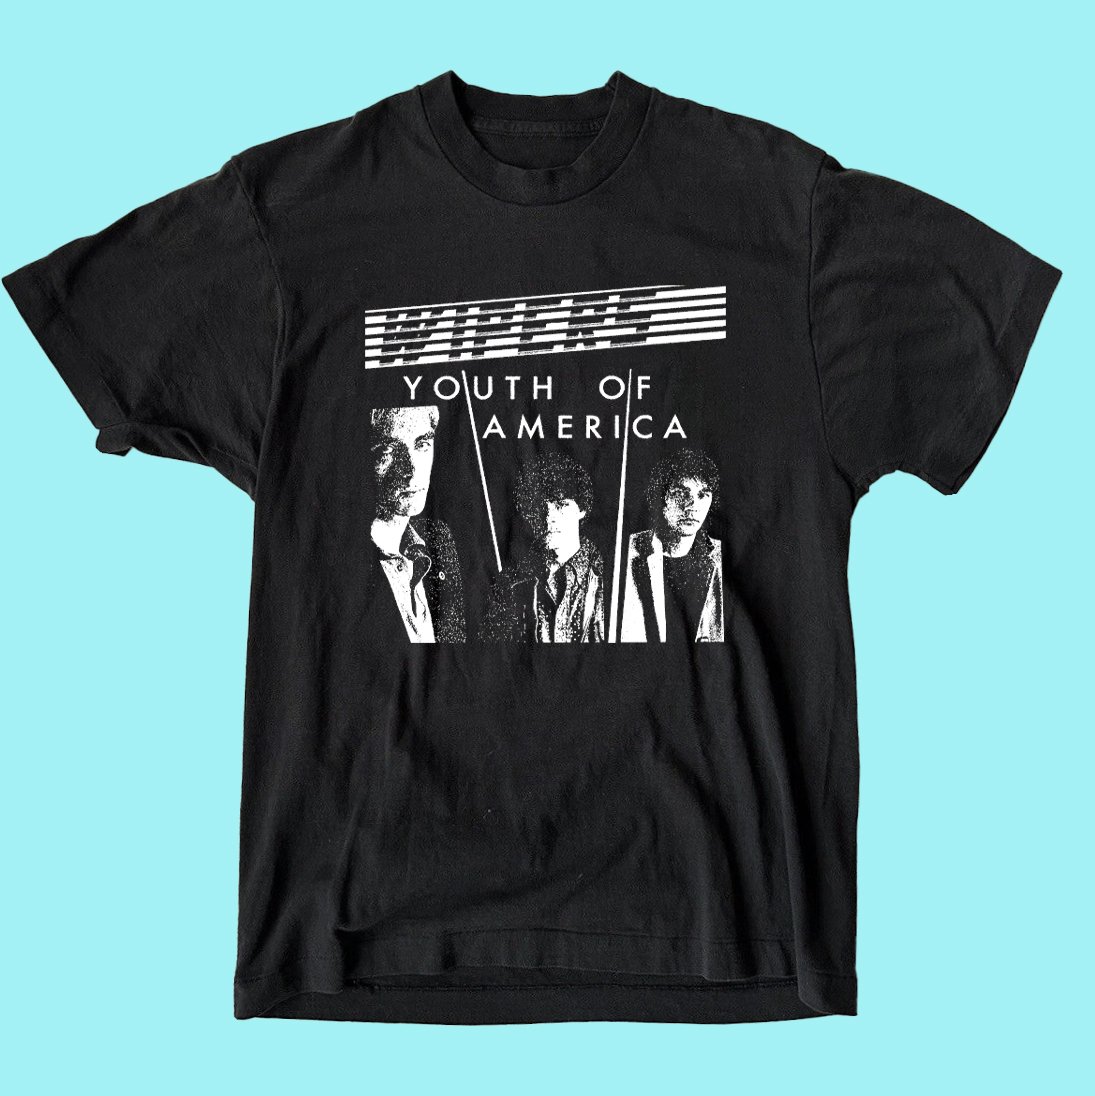 Image of The Wipers - youth of america T-shirt